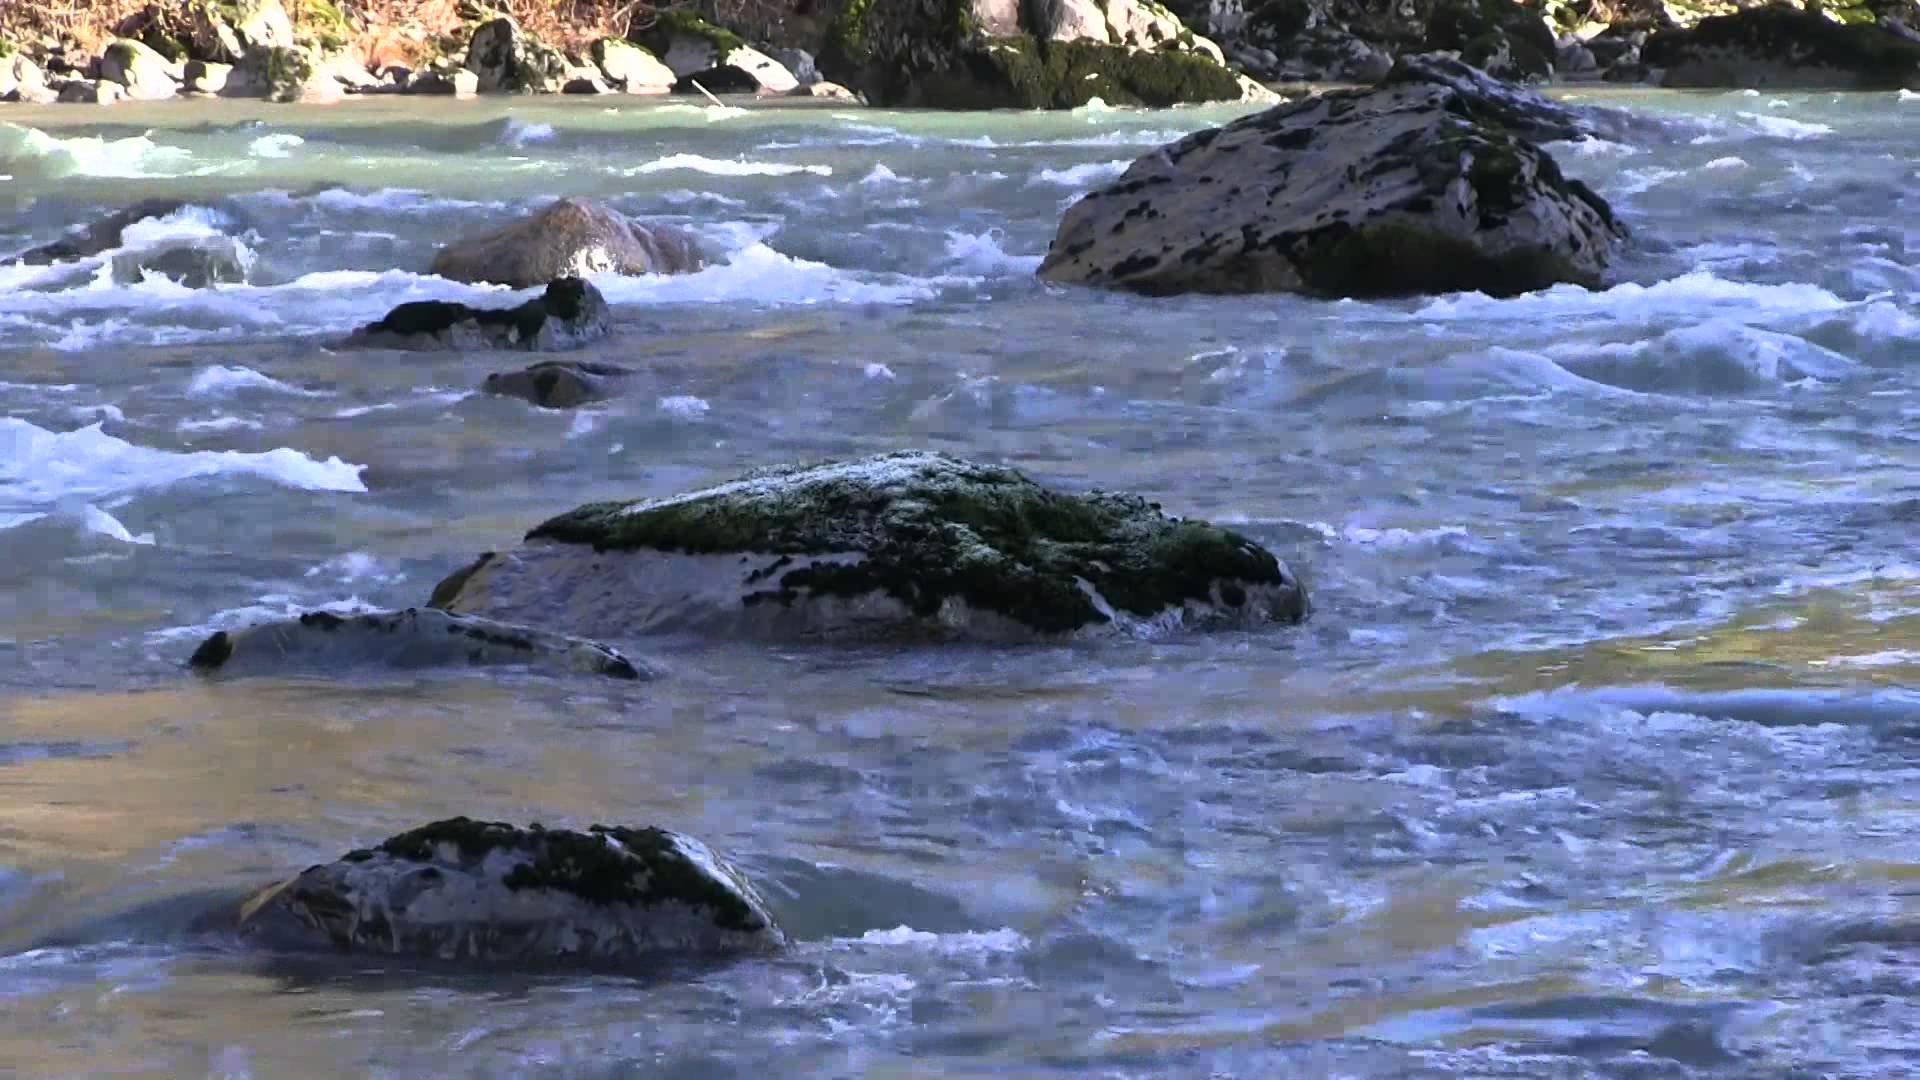 Flowing River 1080p HD Without Music - YouTube